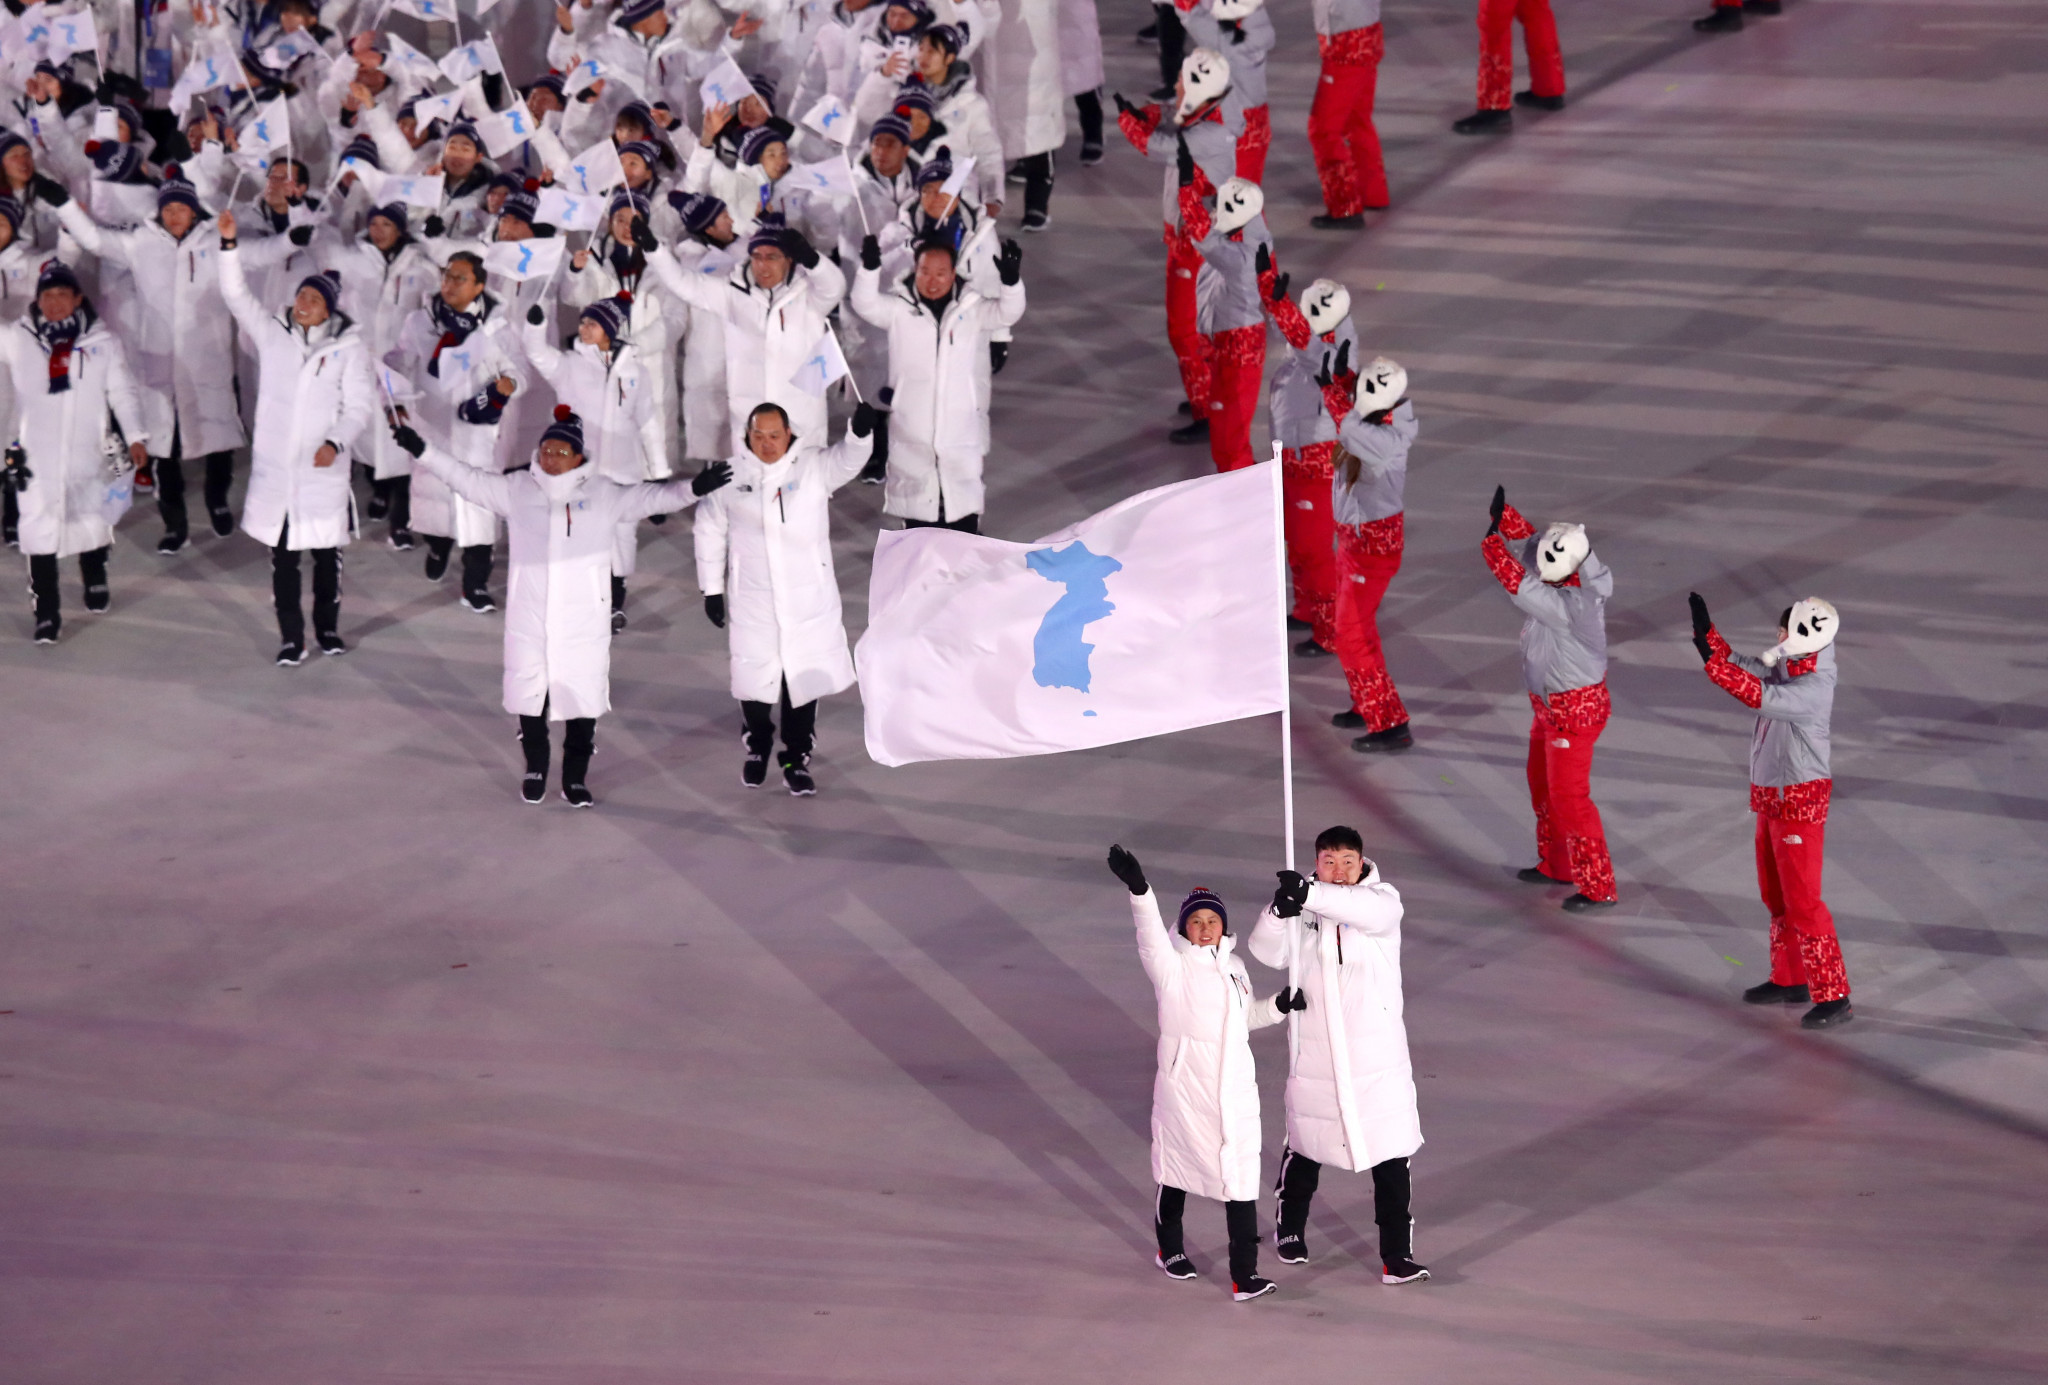 North and South Korea participated together under the unification flag at the Opening Ceremony ©Getty Images